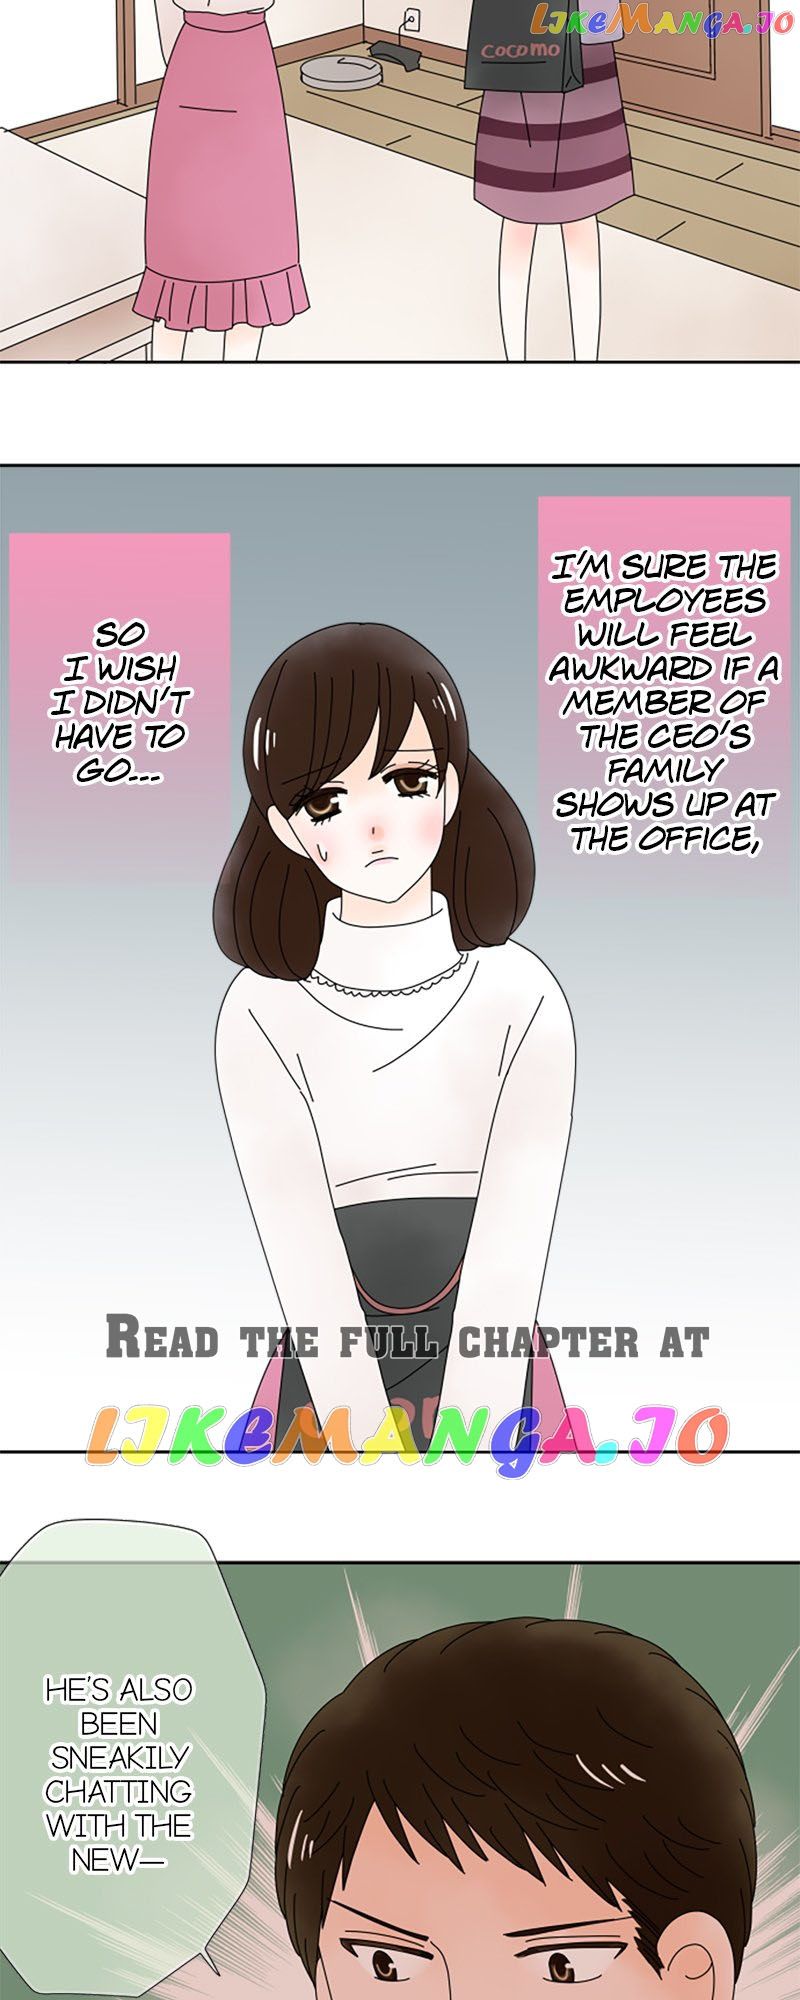 (Re)arranged Marriage Chapter 165 - Page 3